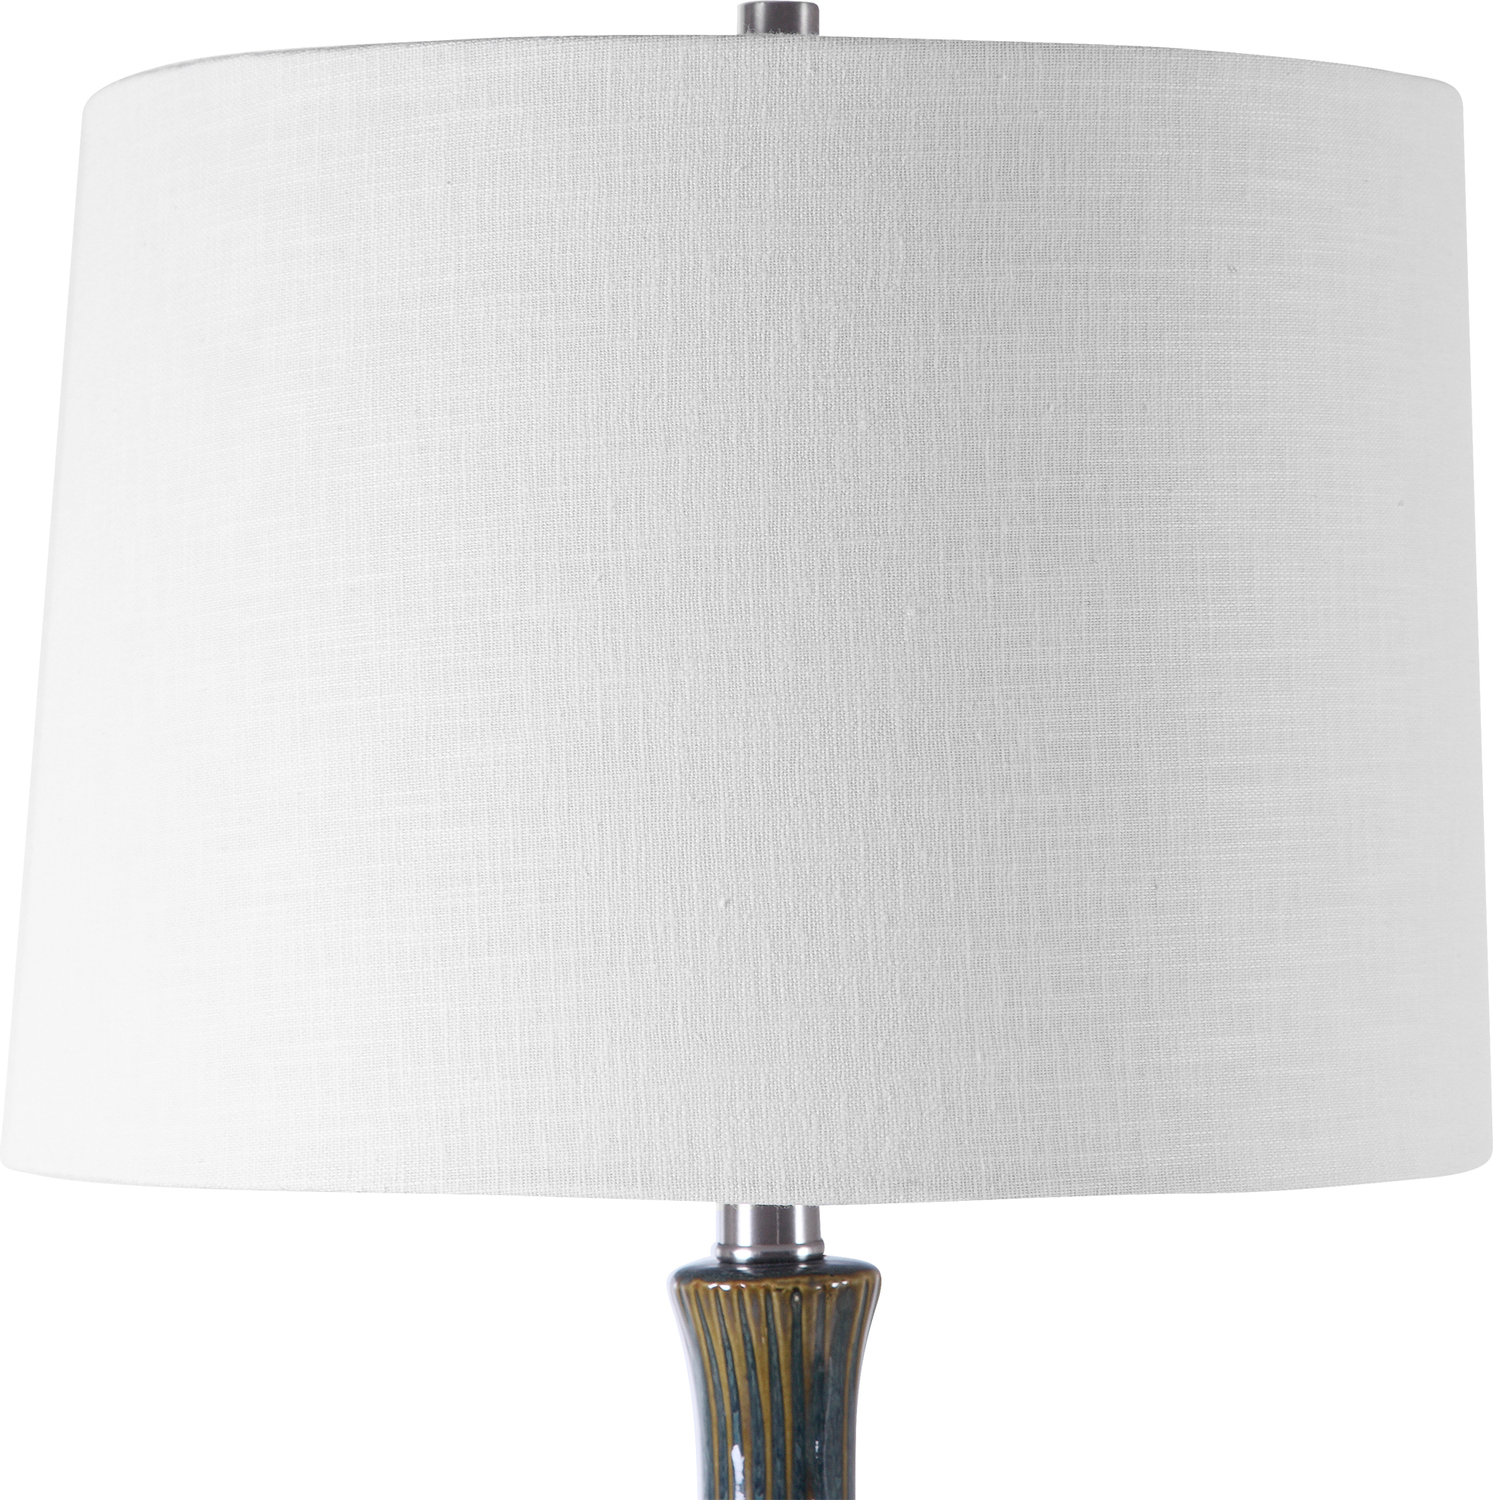 clear glass globe Uttermost Mid-Century Table Lamp Mid-century Inspired Table Lamp Has A Fluted Ceramic Base With Noticeable Ribbed Texture And Is Finished In A Cream, Light Blue, Indigo, And Dark Brown Ombre Glaze With Brushed Nickel Plated Accents.